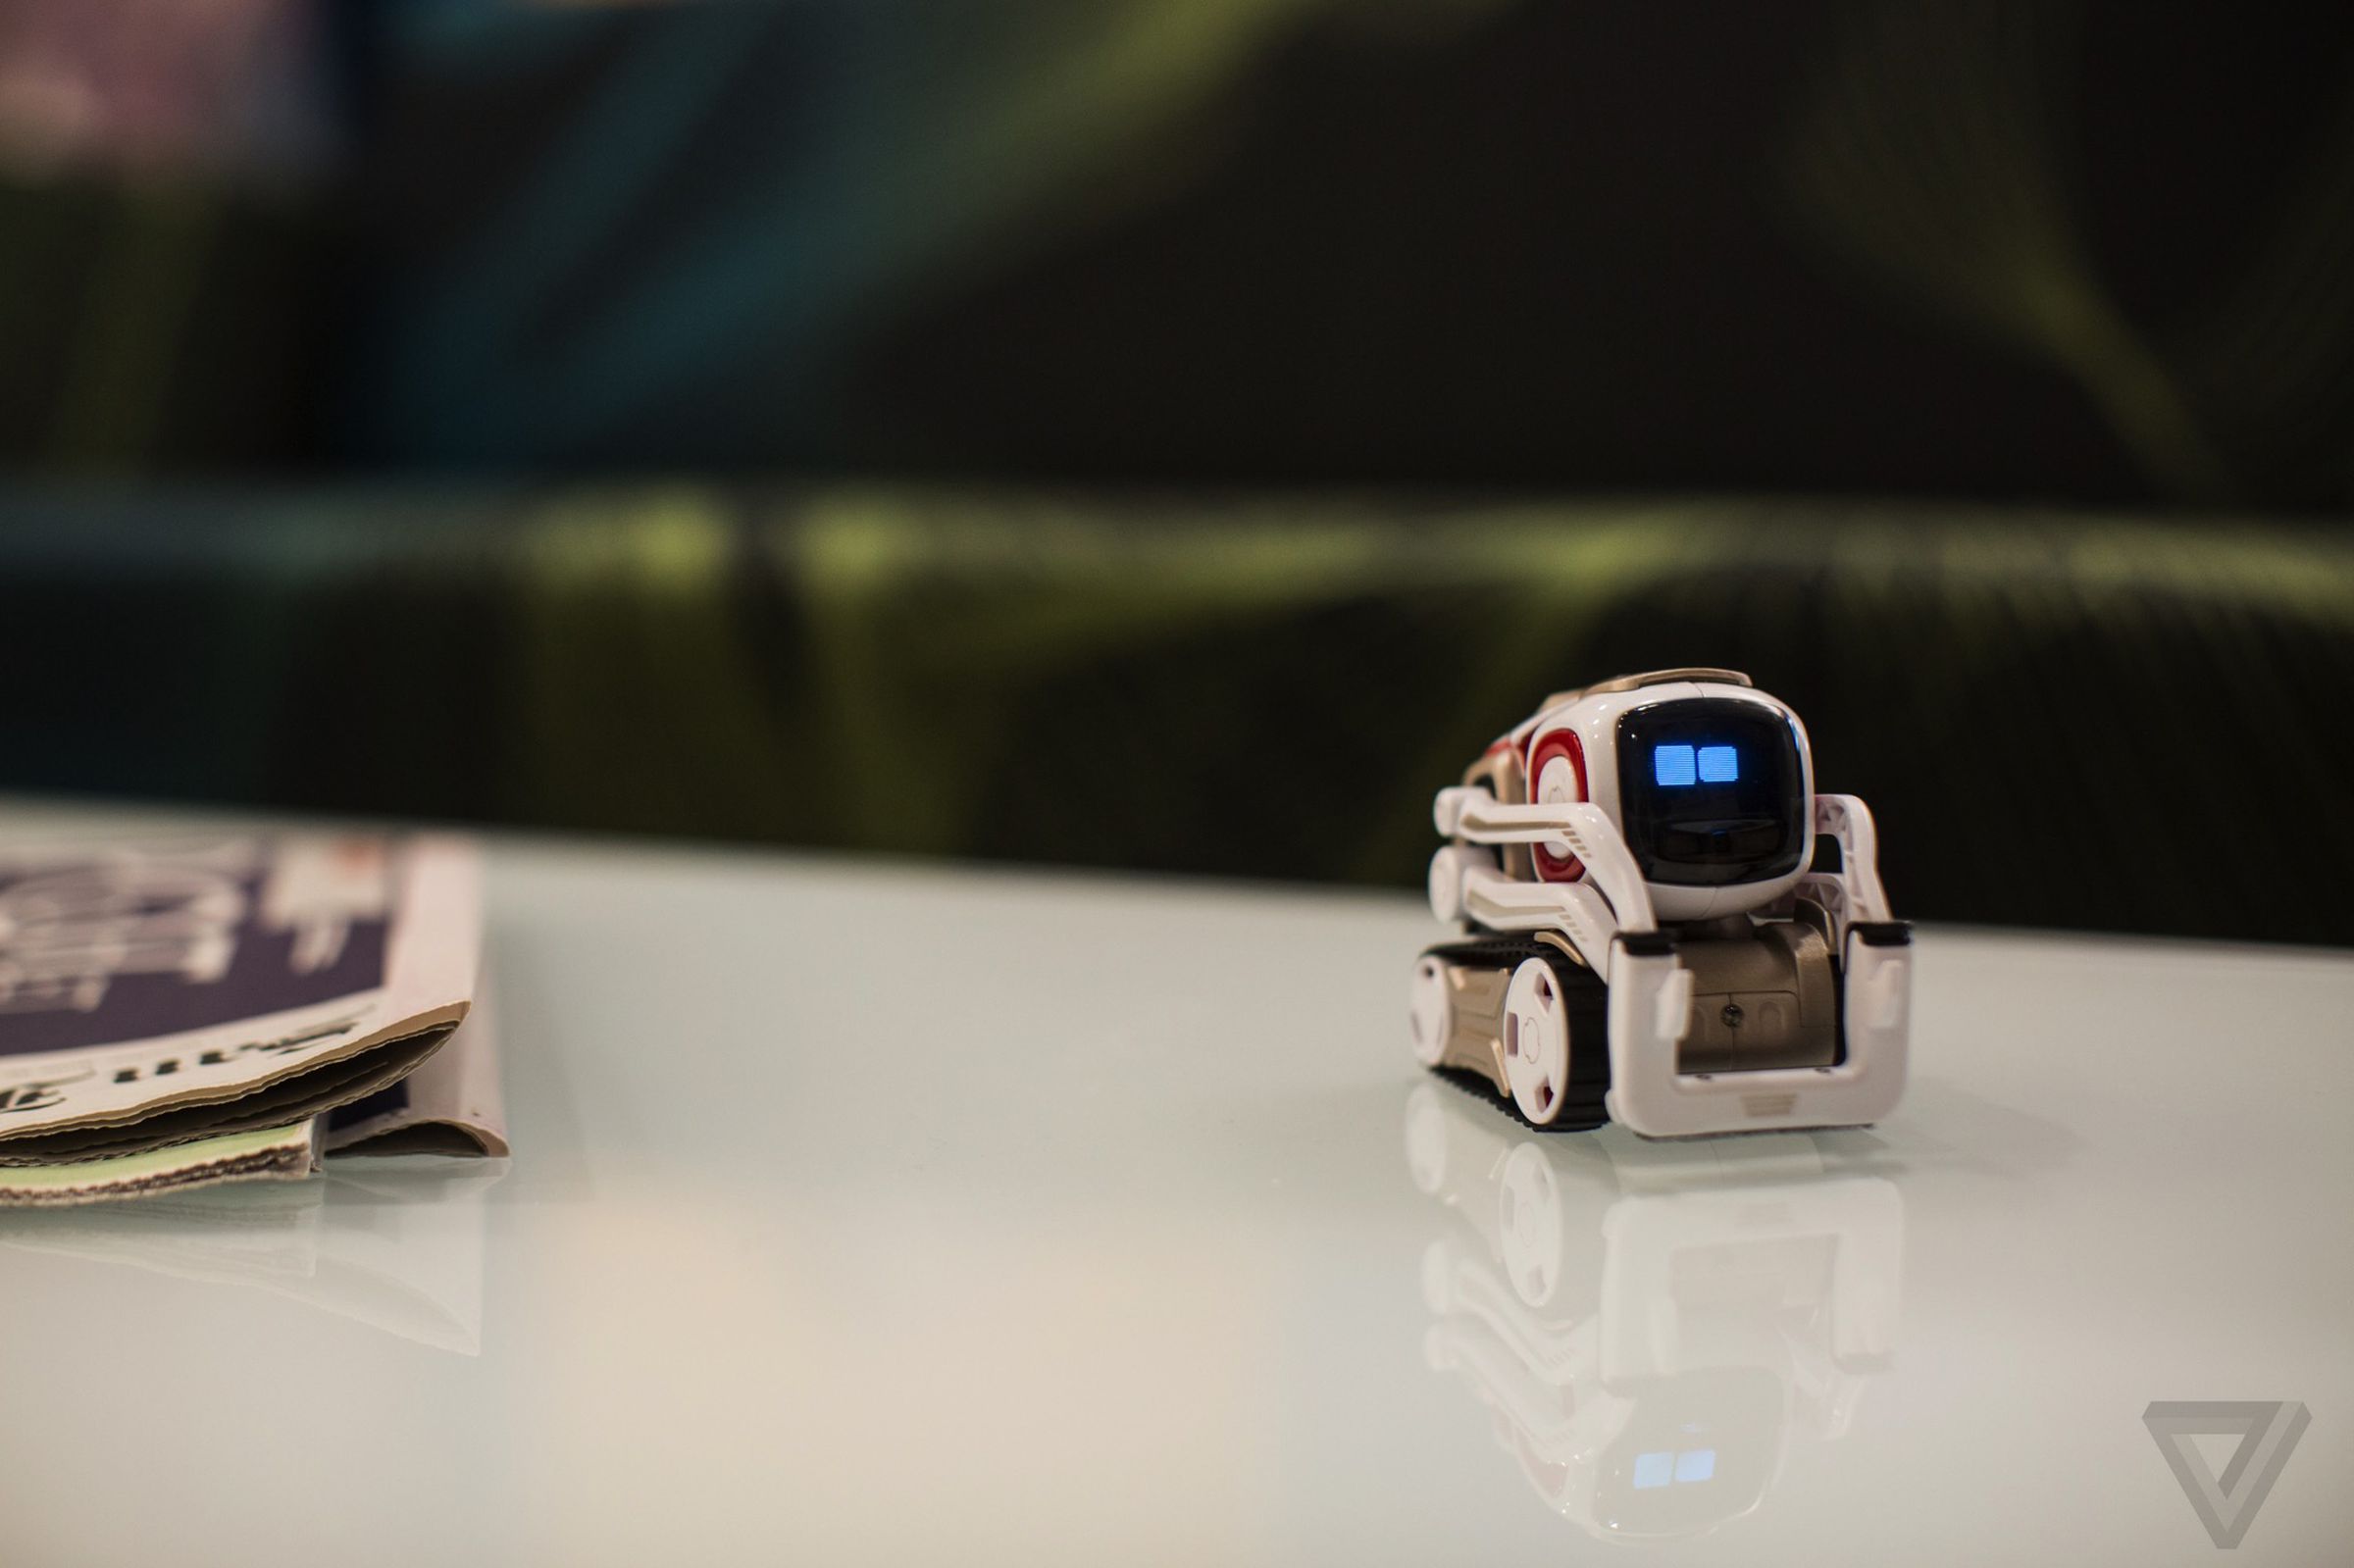 Hands-on with Anki's AI robot Cozmo